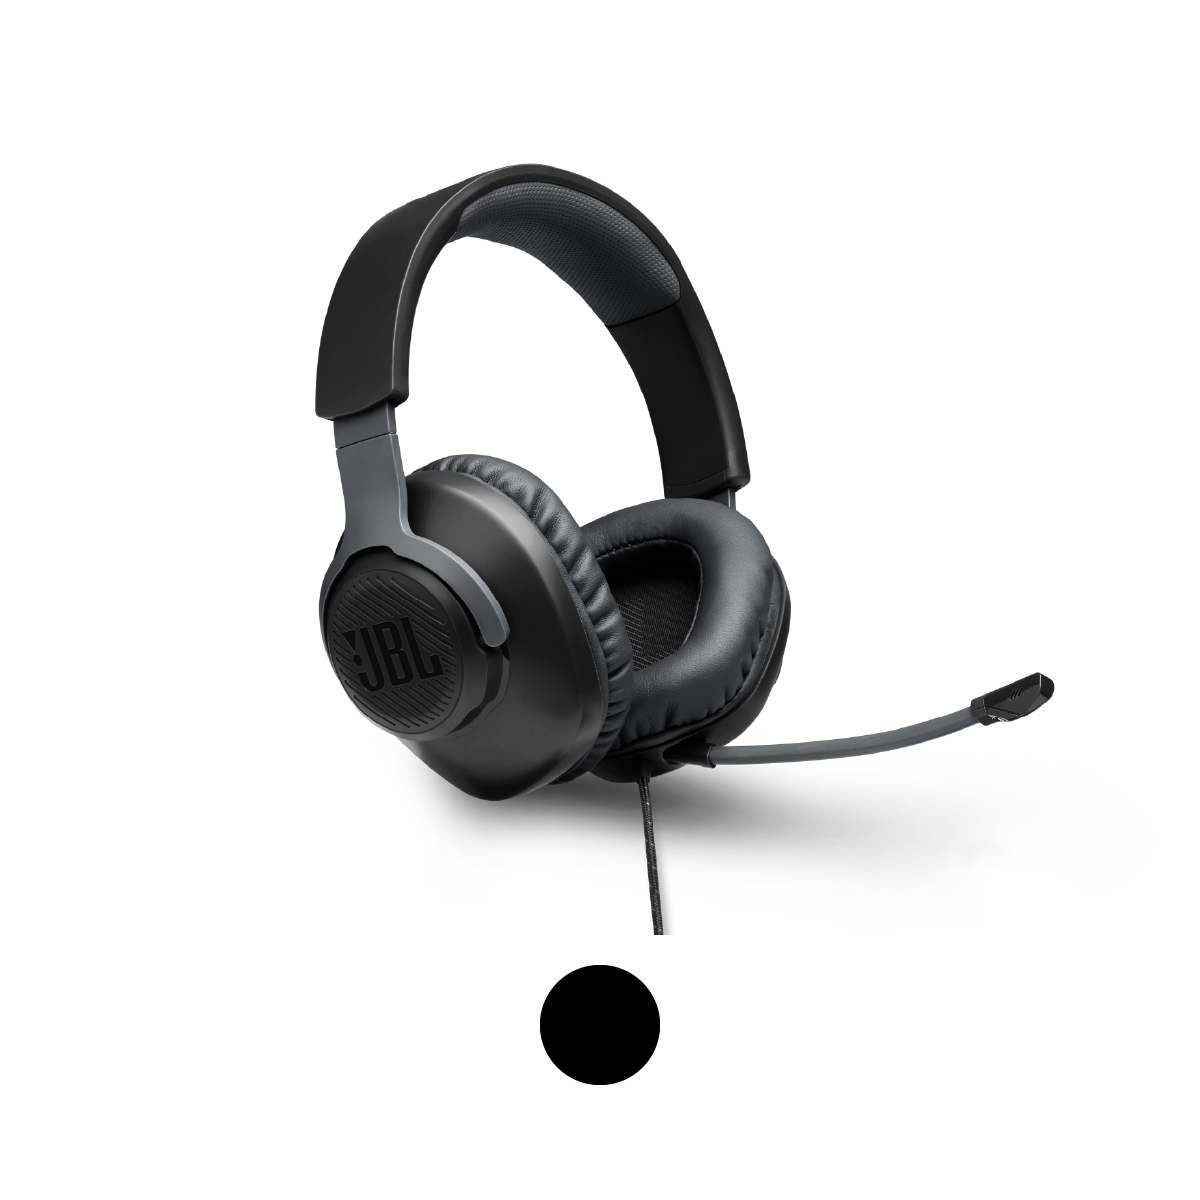 jbl-free-wfh - Black - Wireless, over-ear, True Adaptive Noise Cancelling headphones inspired by pro musicians - Hero